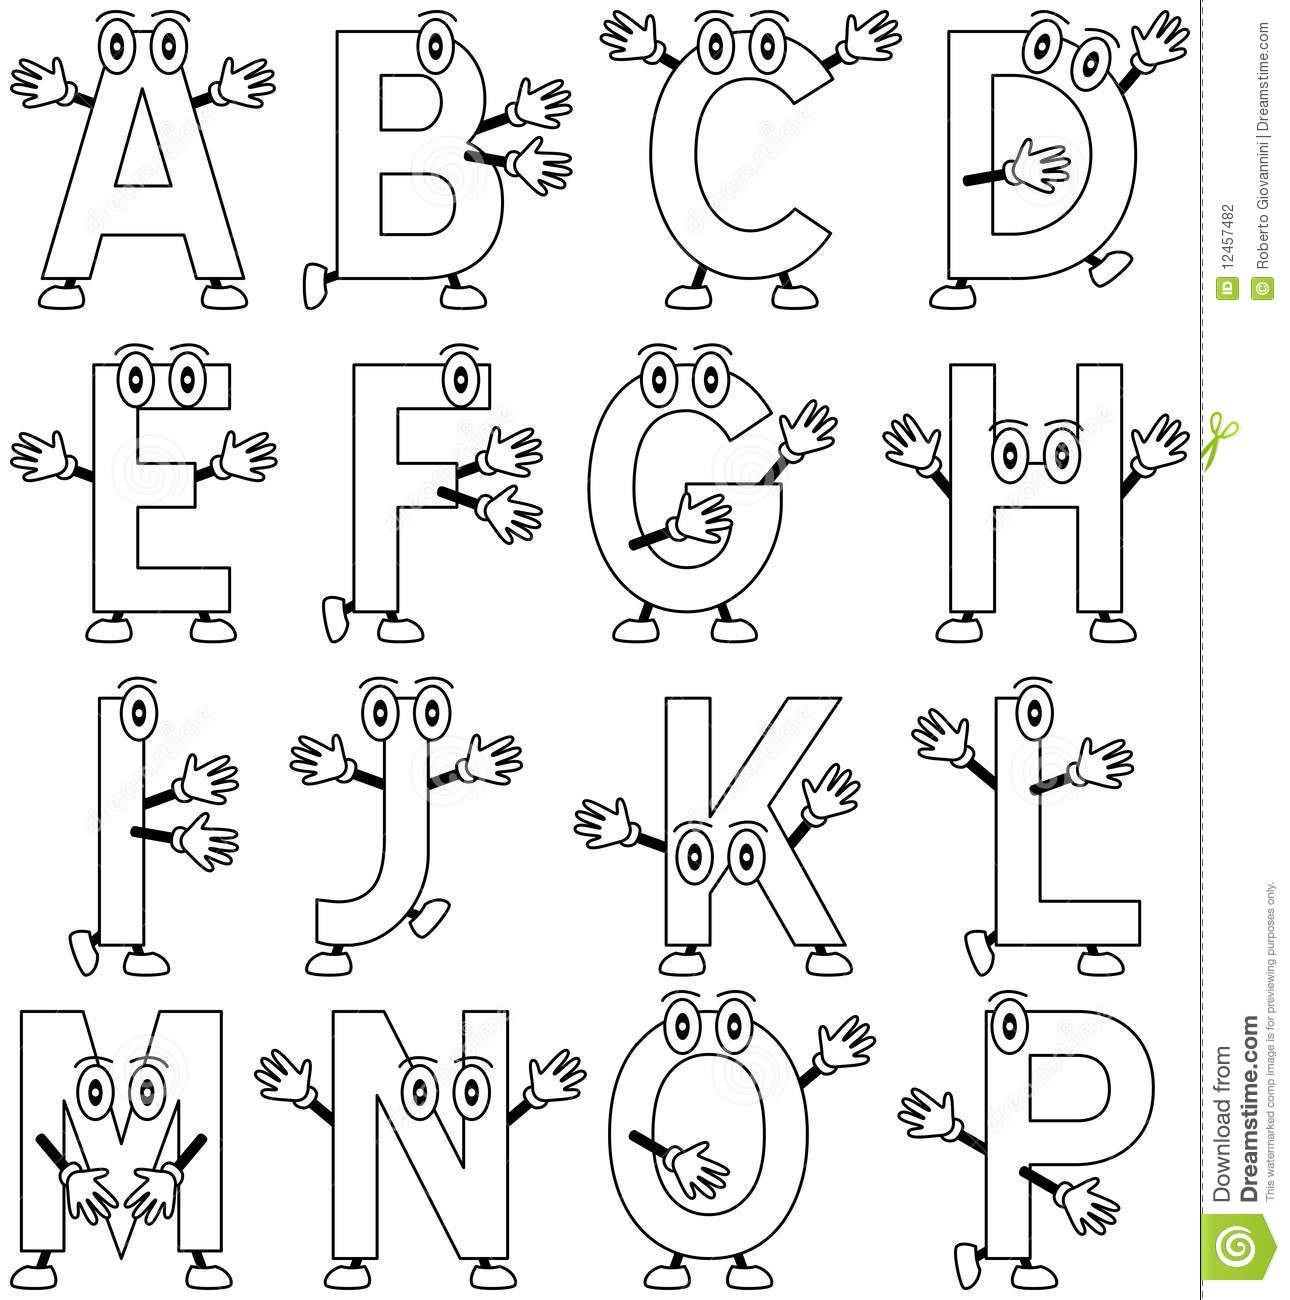 colouring pictures of alphabets coloring cartoon alphabet 1 stock vector illustration pictures colouring of alphabets 